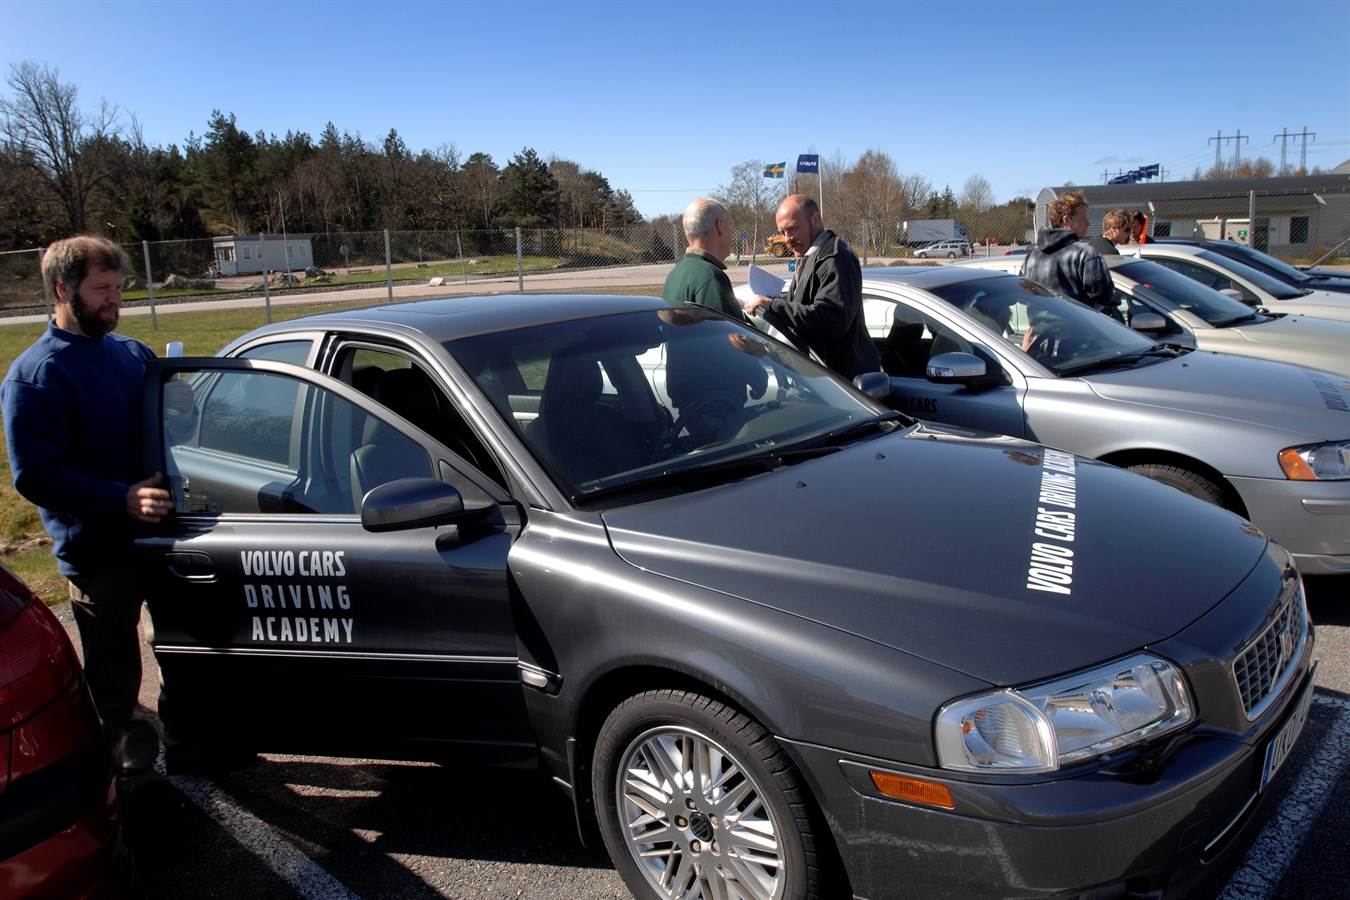 Volvo Cars Driving Academy, testing eco-driving